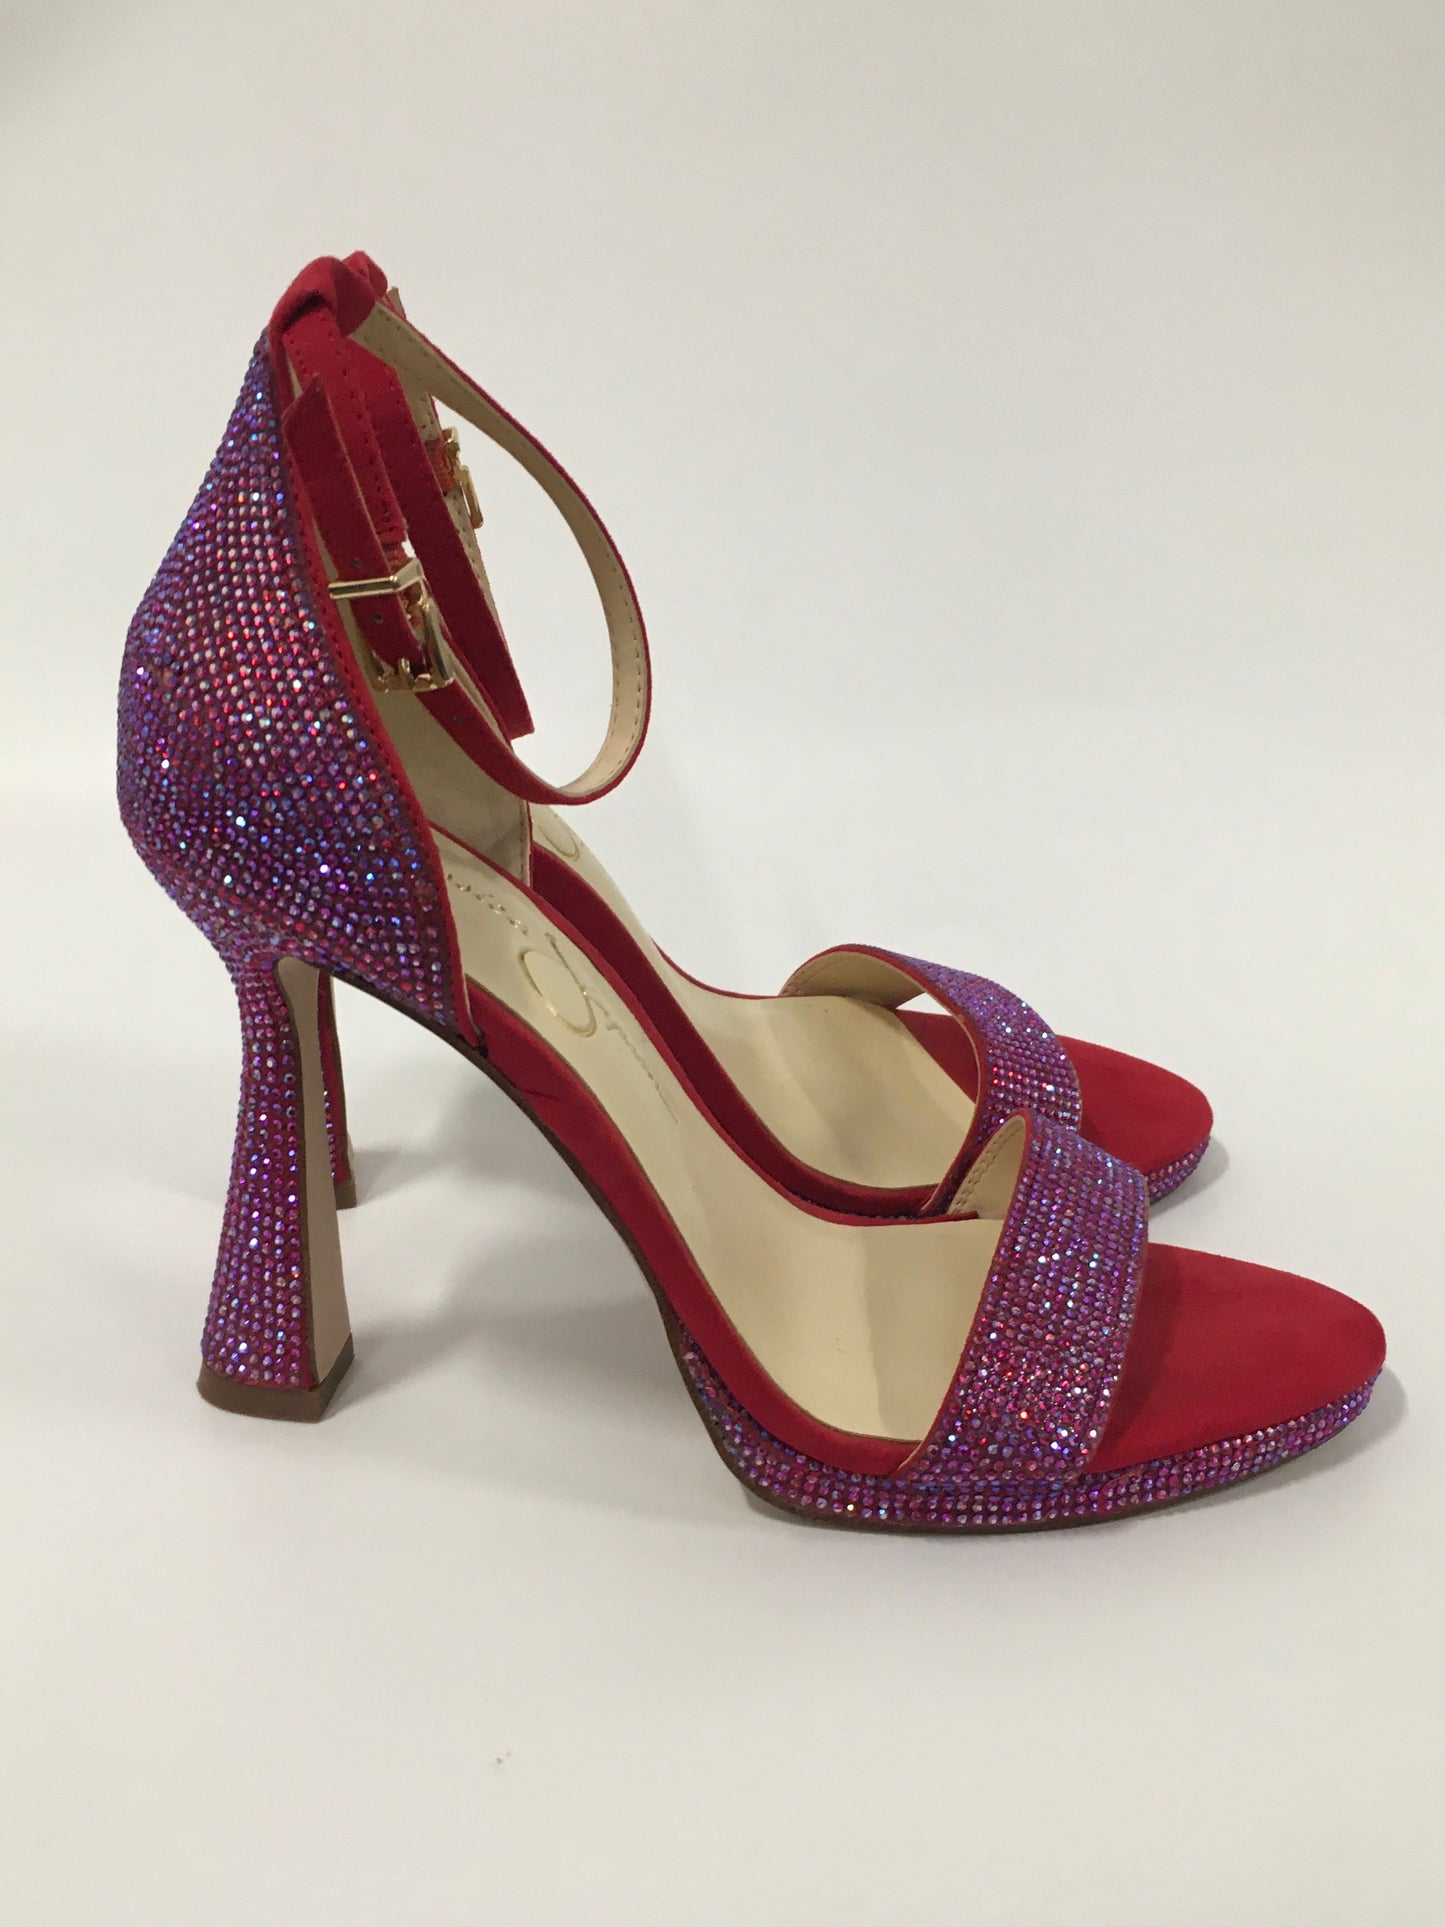 Red Shoes Heels Stiletto Jessica Simpson, Size 7.5